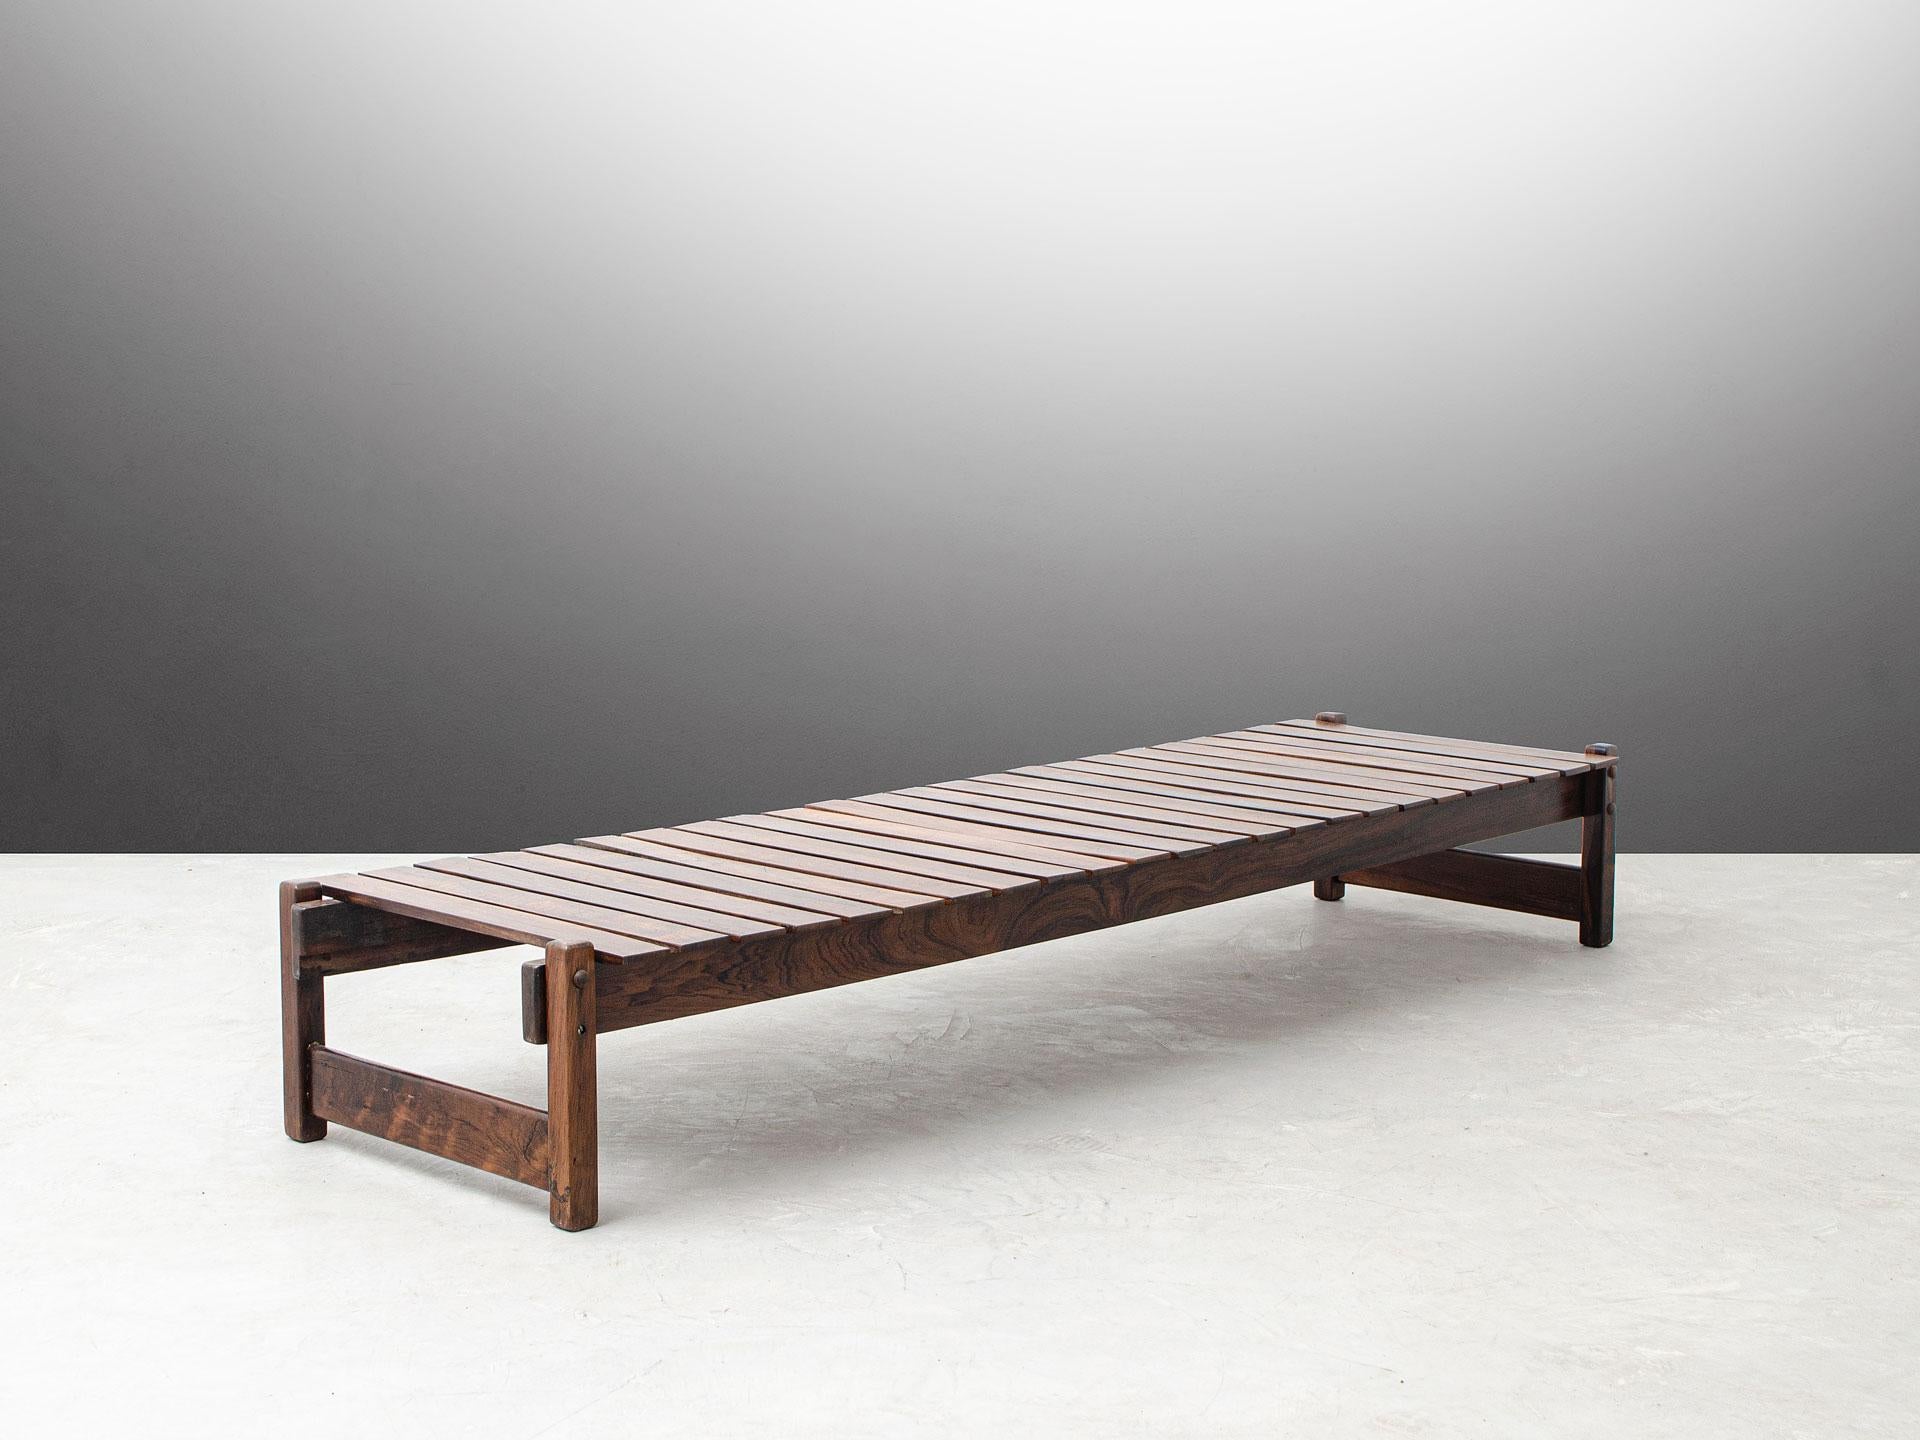 This is an outstanding bench that is definitely an eye-catcher. The design of the beautiful Brazilian hardwood structure combines beautifully with the minimalistic design. The time marks can be seen on the surface of the nice patina. This piece is